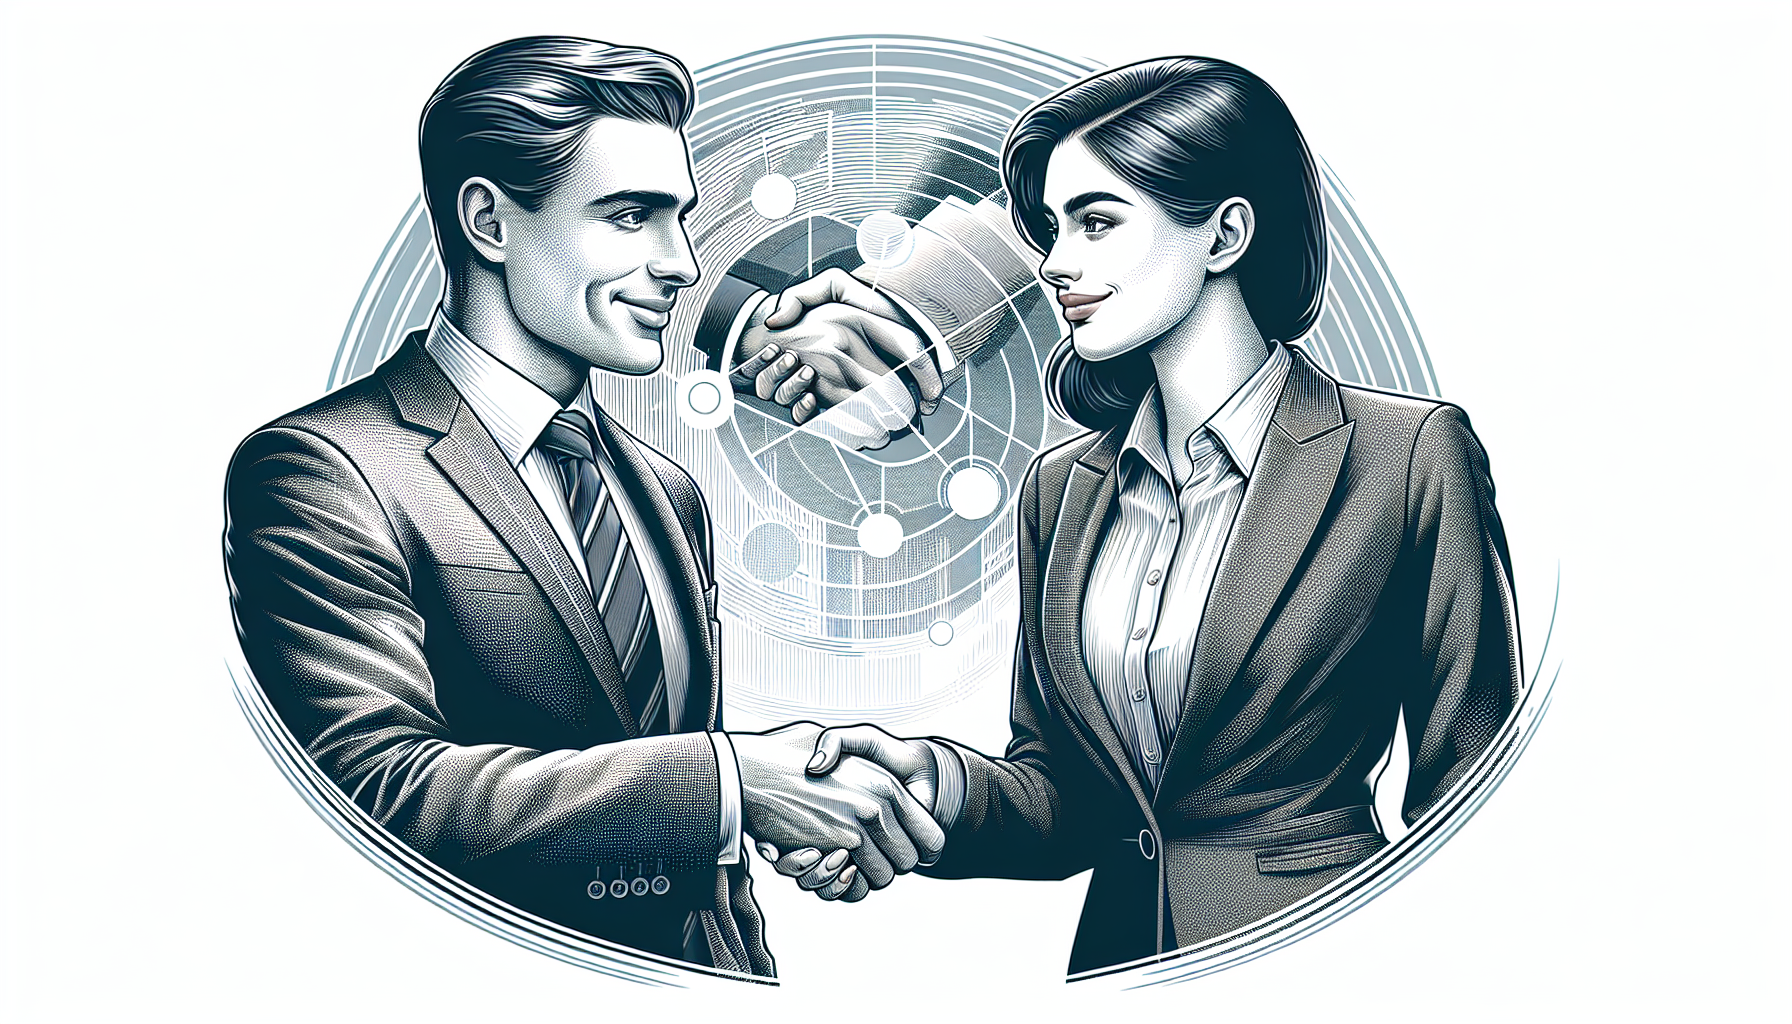 Illustration of a handshake between two professionals